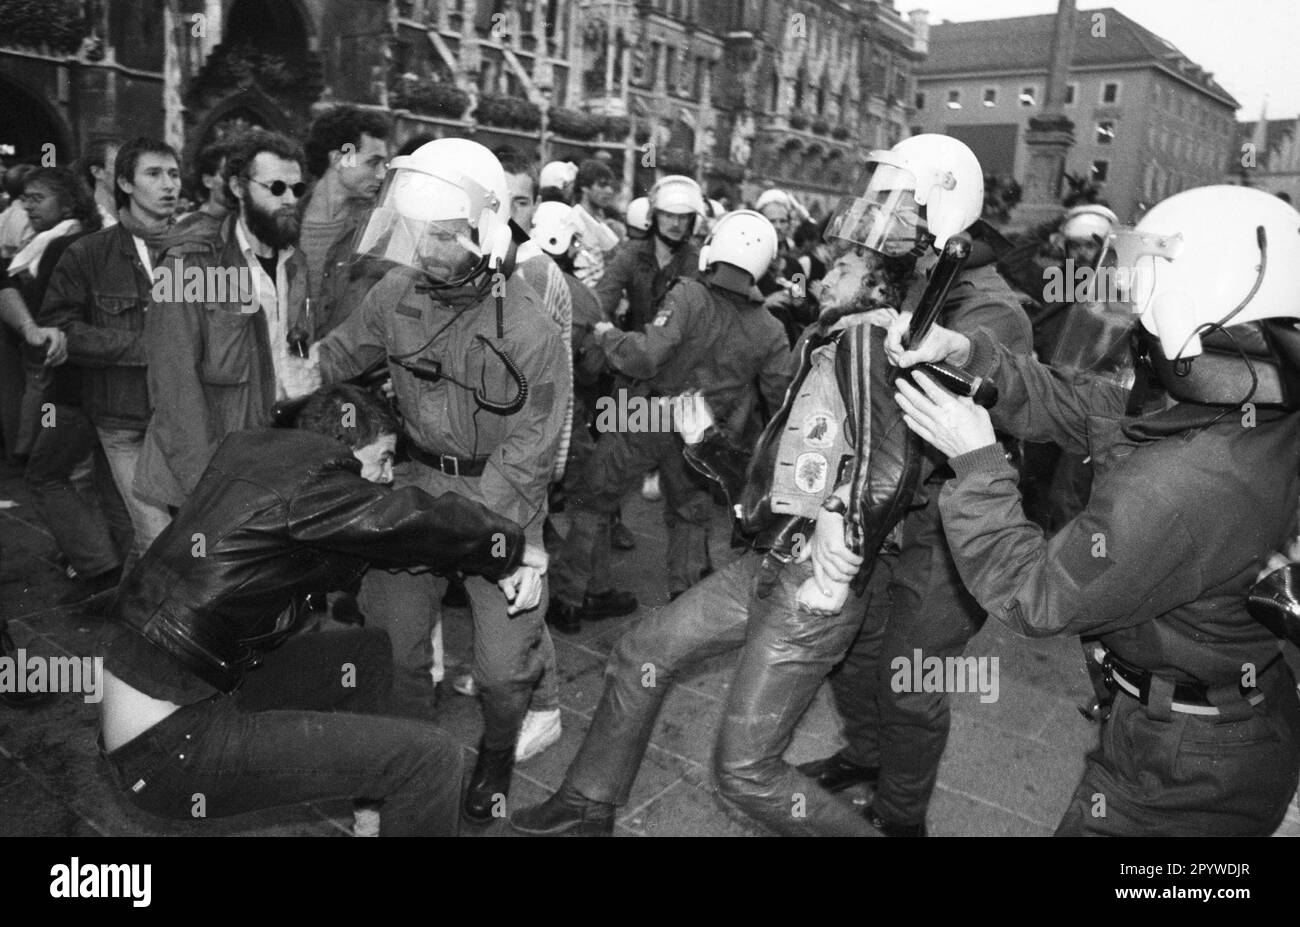 Demonstrations against the construction of the reprocessing plant (WAA) in Wackersdorf. In Munich, the riot police use massive baton to break up an unregistered rally by opponents of nuclear power. Munich, Bavaria, Germany, 04.10.1986 Stock Photo